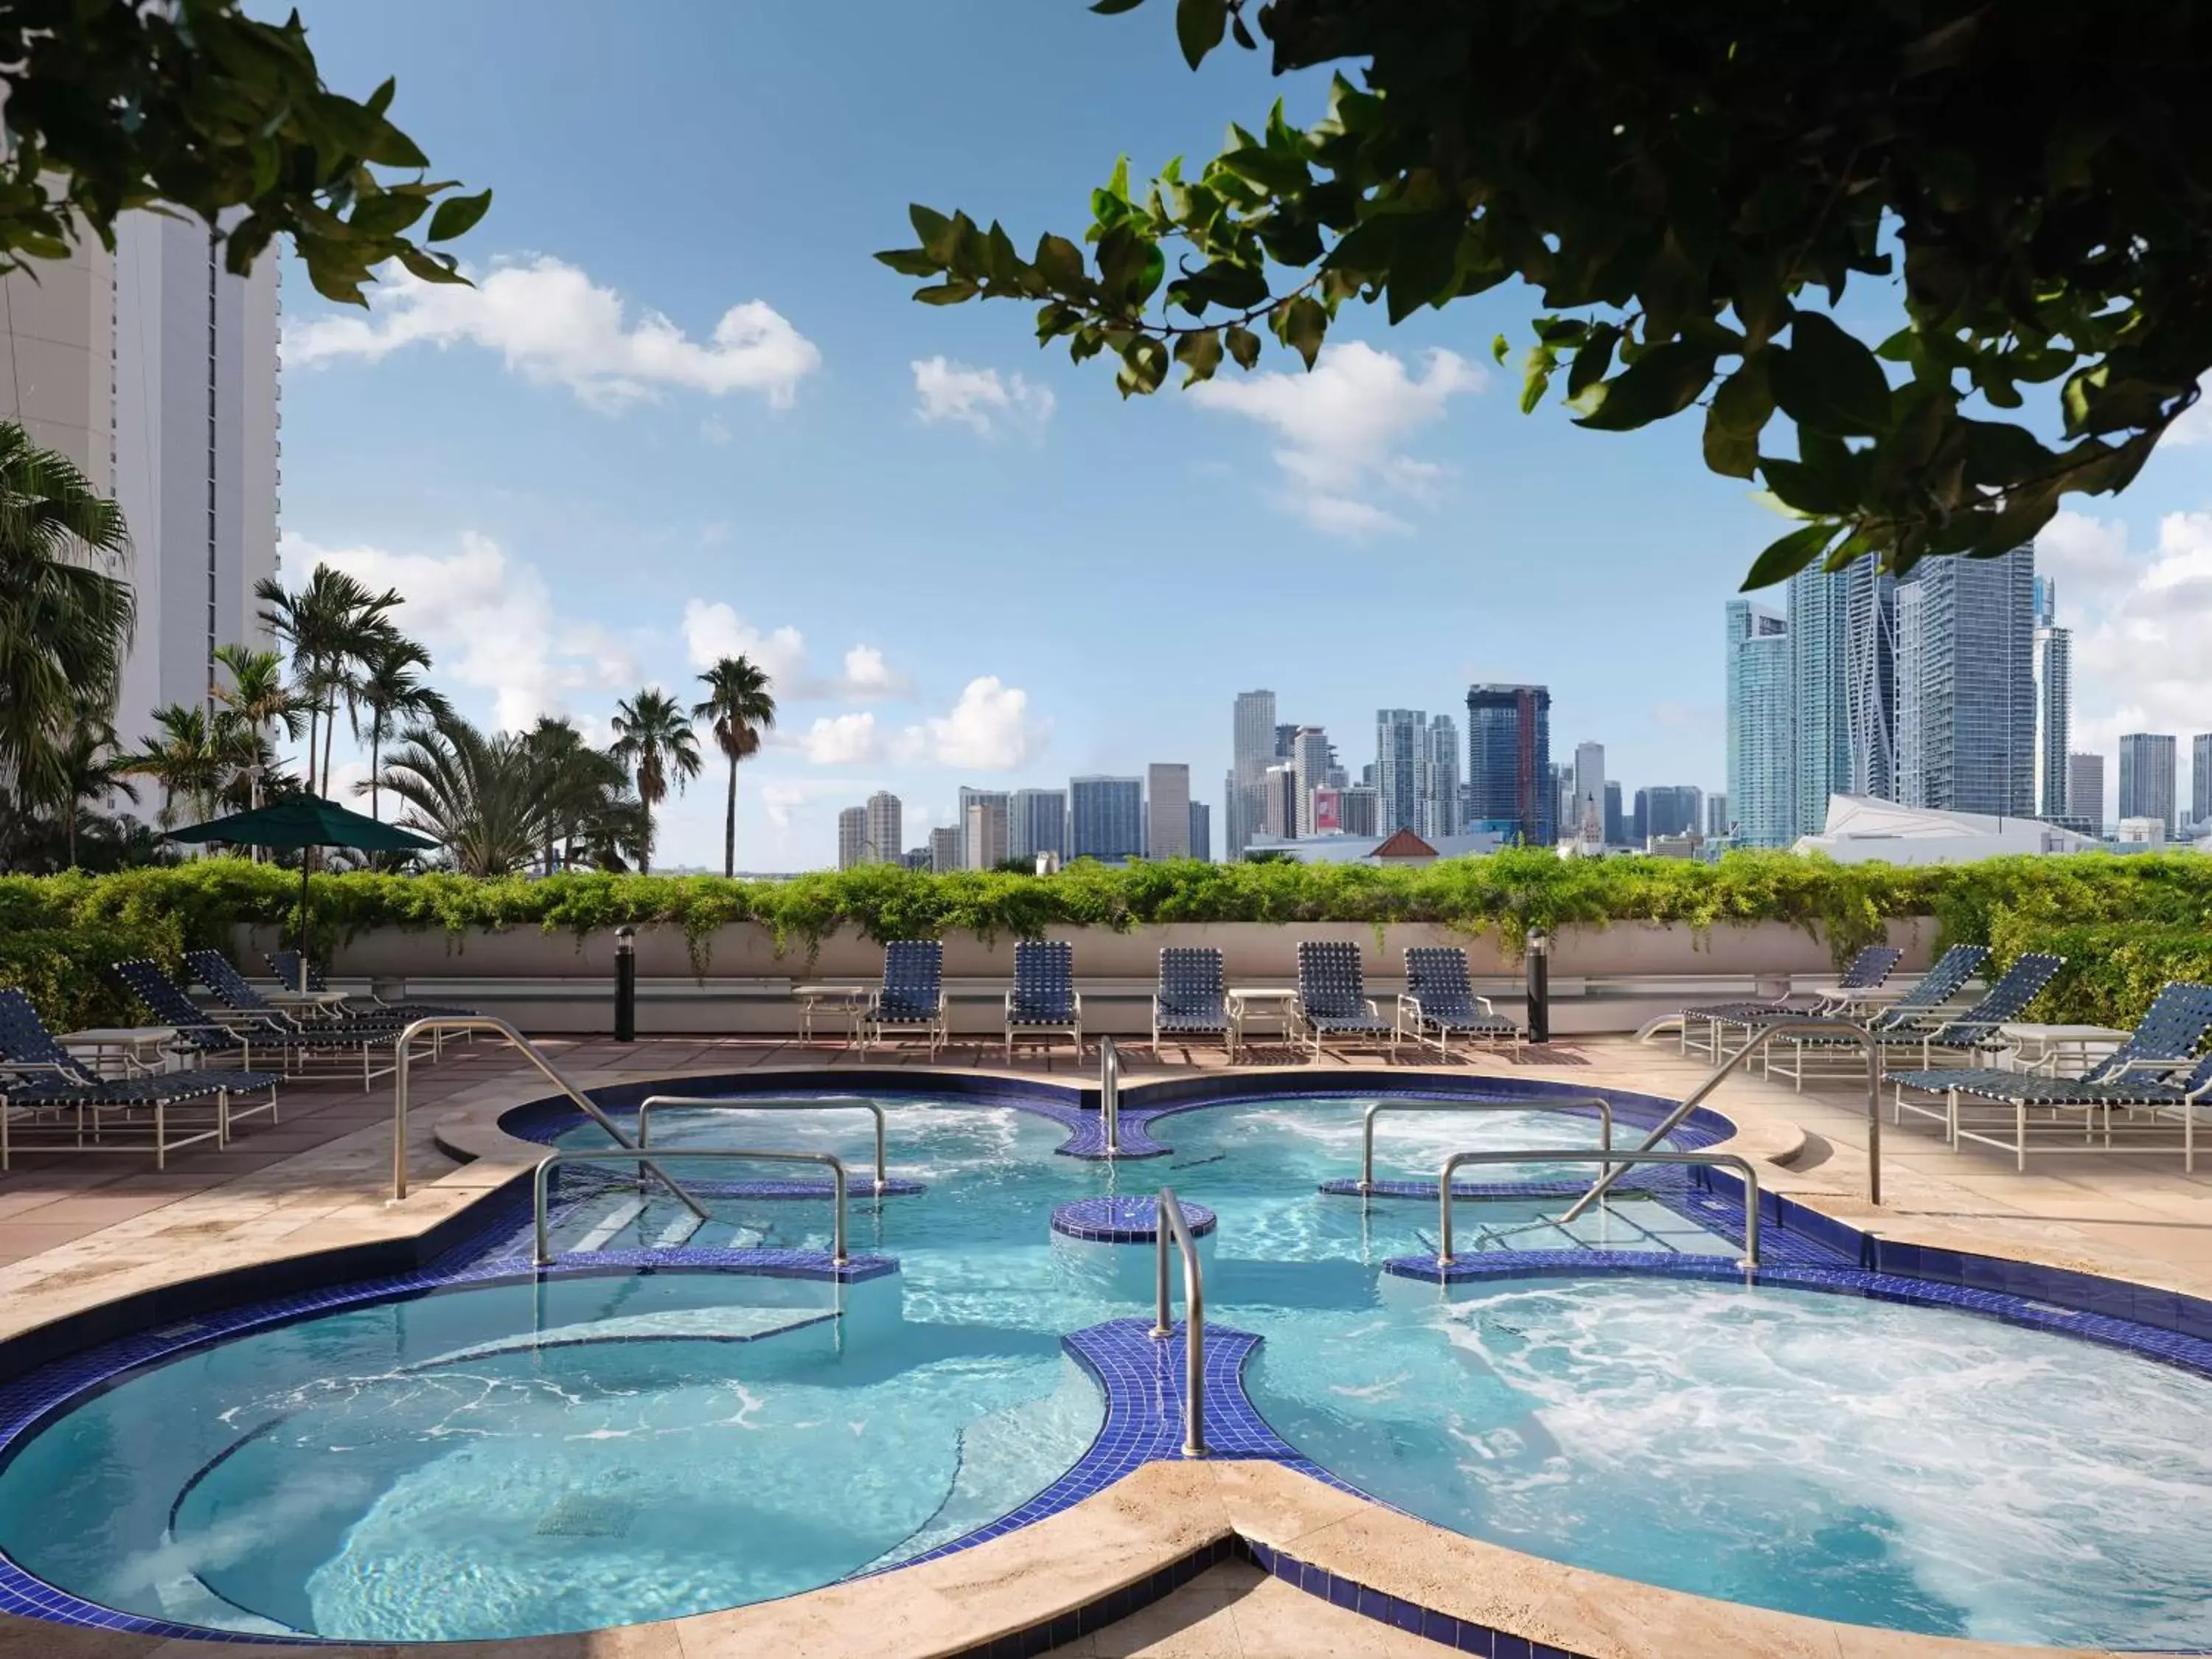 Hot Tub, Swimming Pool in DoubleTree by Hilton Grand Hotel Biscayne Bay